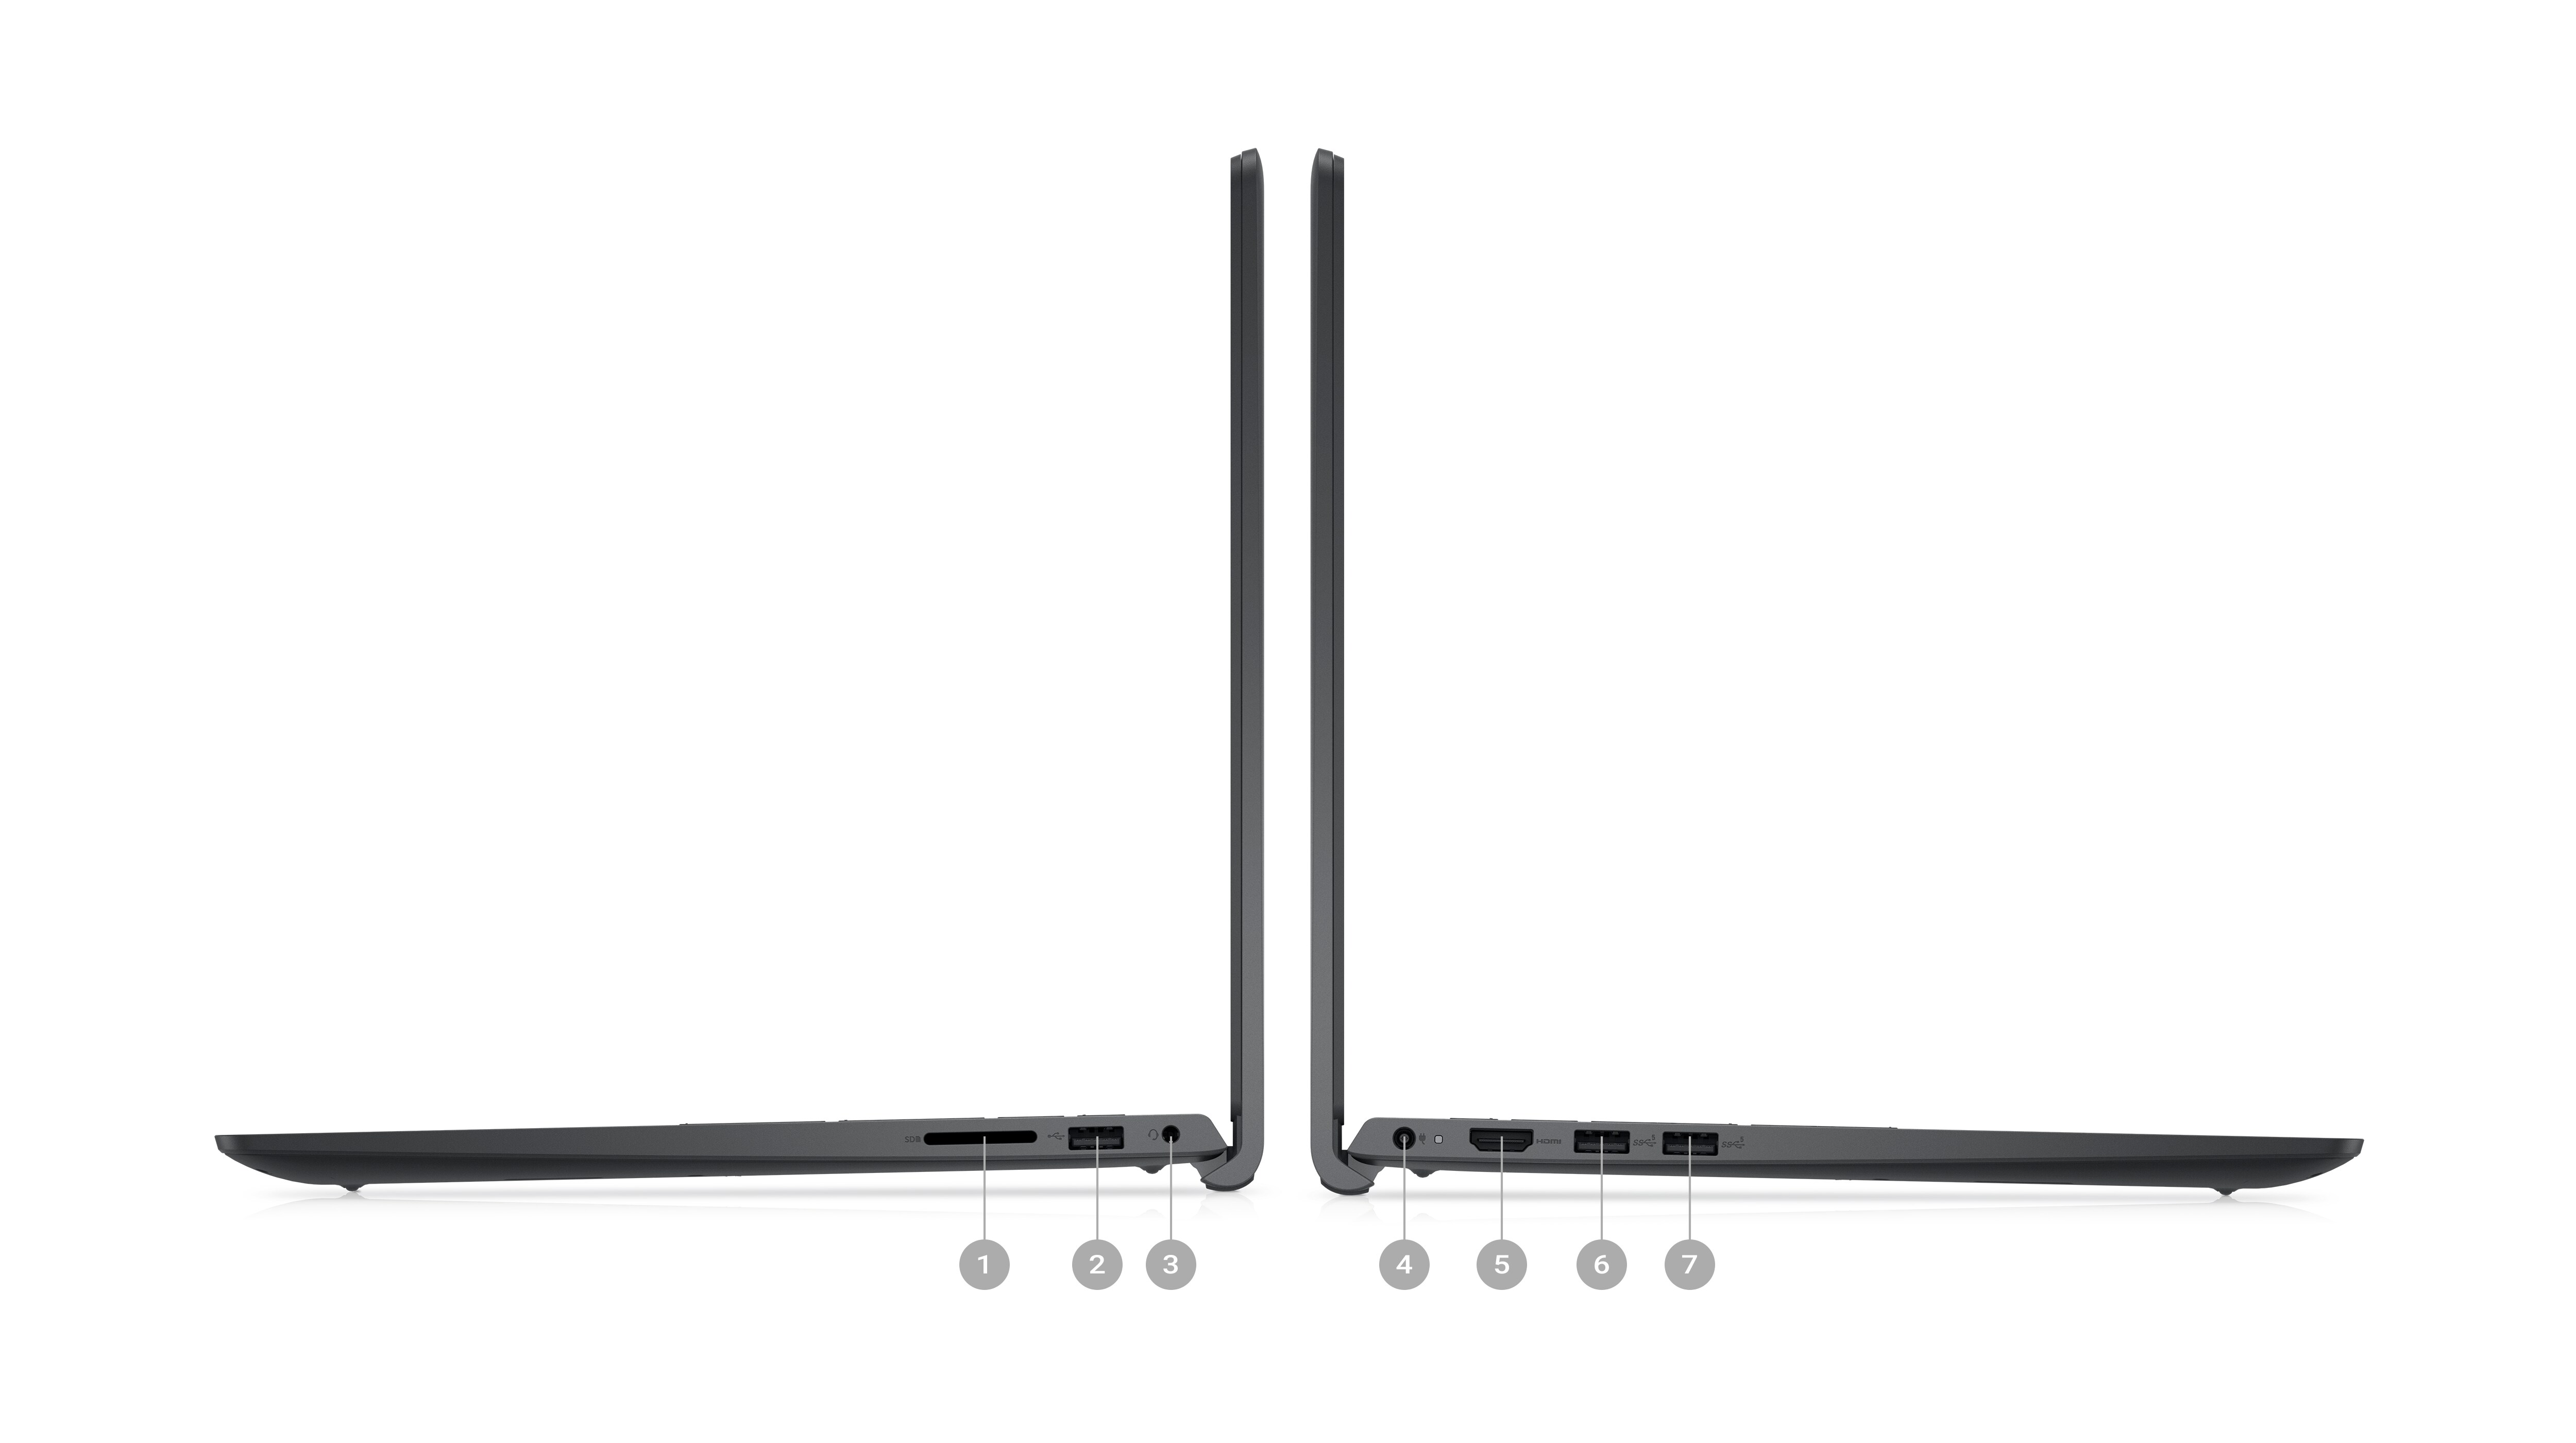 Picture of two Dell Inspiron 15 3521 laptops placed sideways with numbers from 1 to 7 signaling the product ports. 